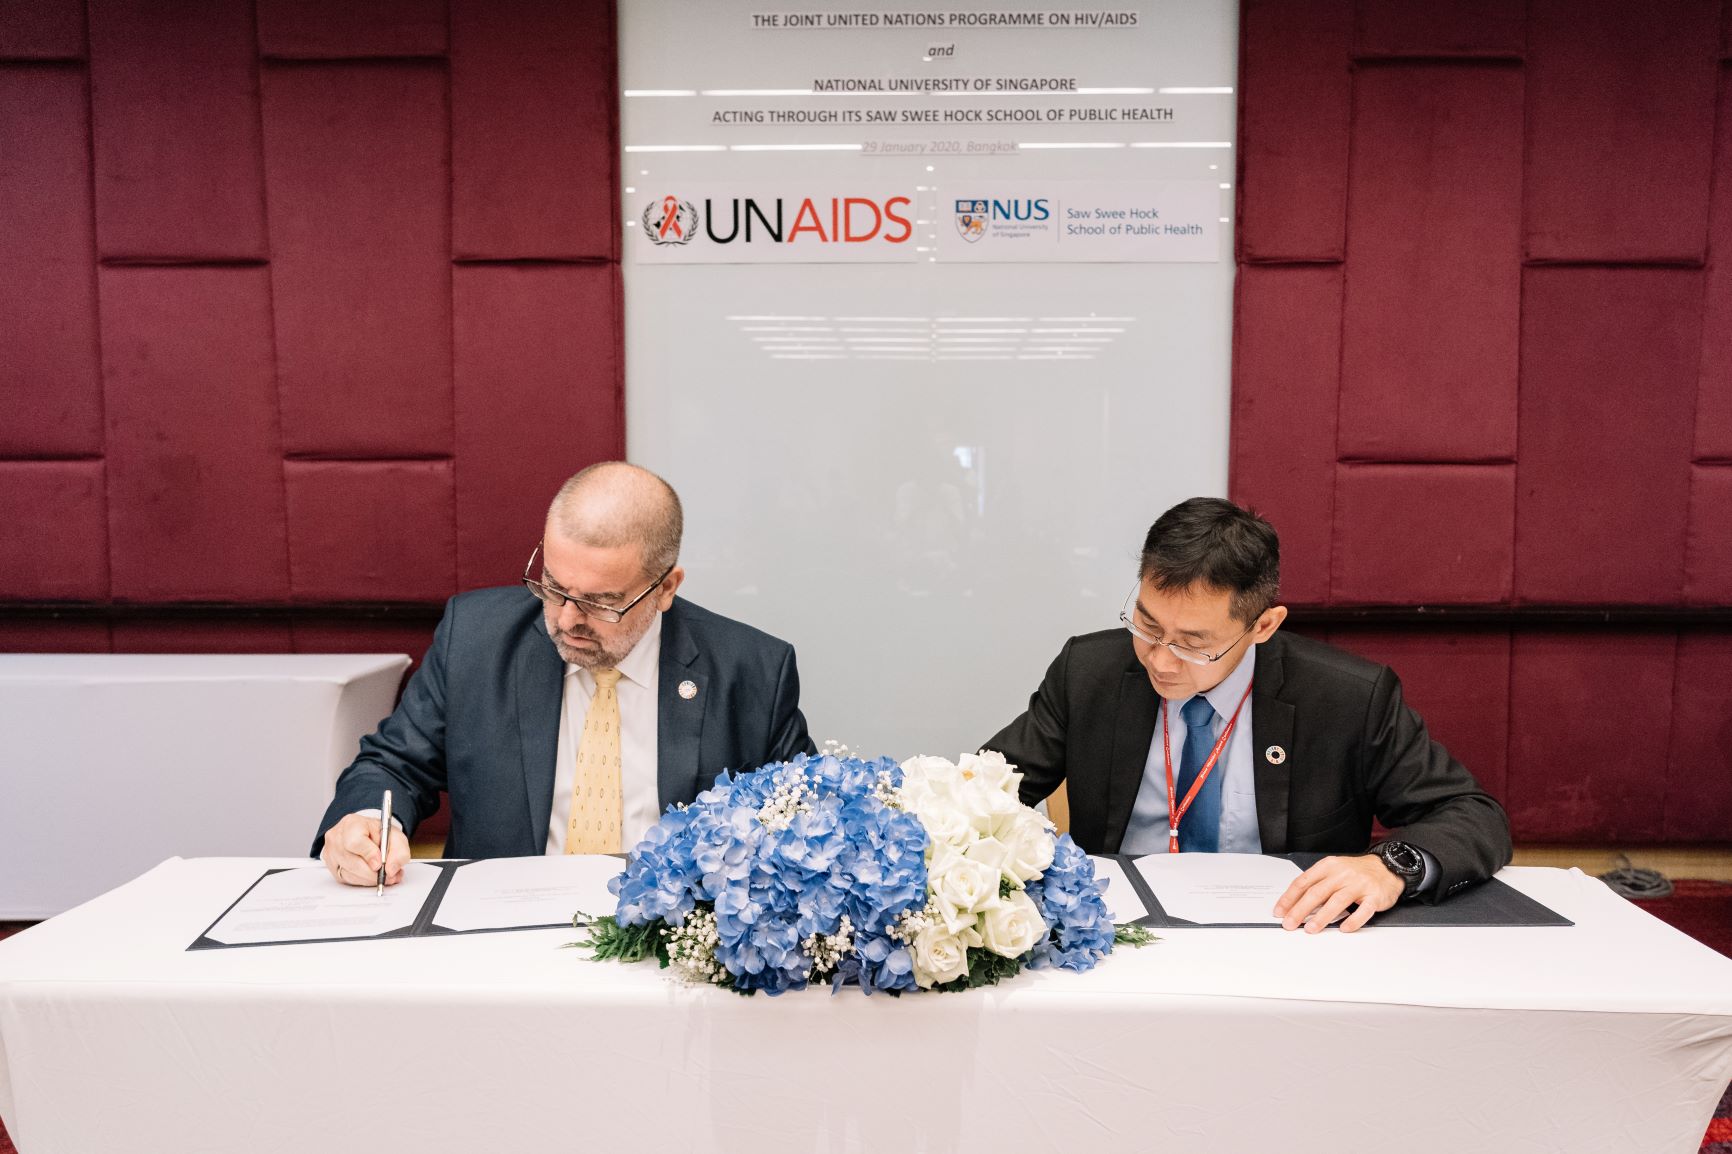 UNAIDS Regional Director for Asia and the Pacific, Mr Eamonn Murphy, and Dean, Professor Teo Yik Ying, signed the memorandum of understanding at a ceremony on the sidelines of the Prince Mahidol Award Conference (PMAC) 2020 in Bangkok.